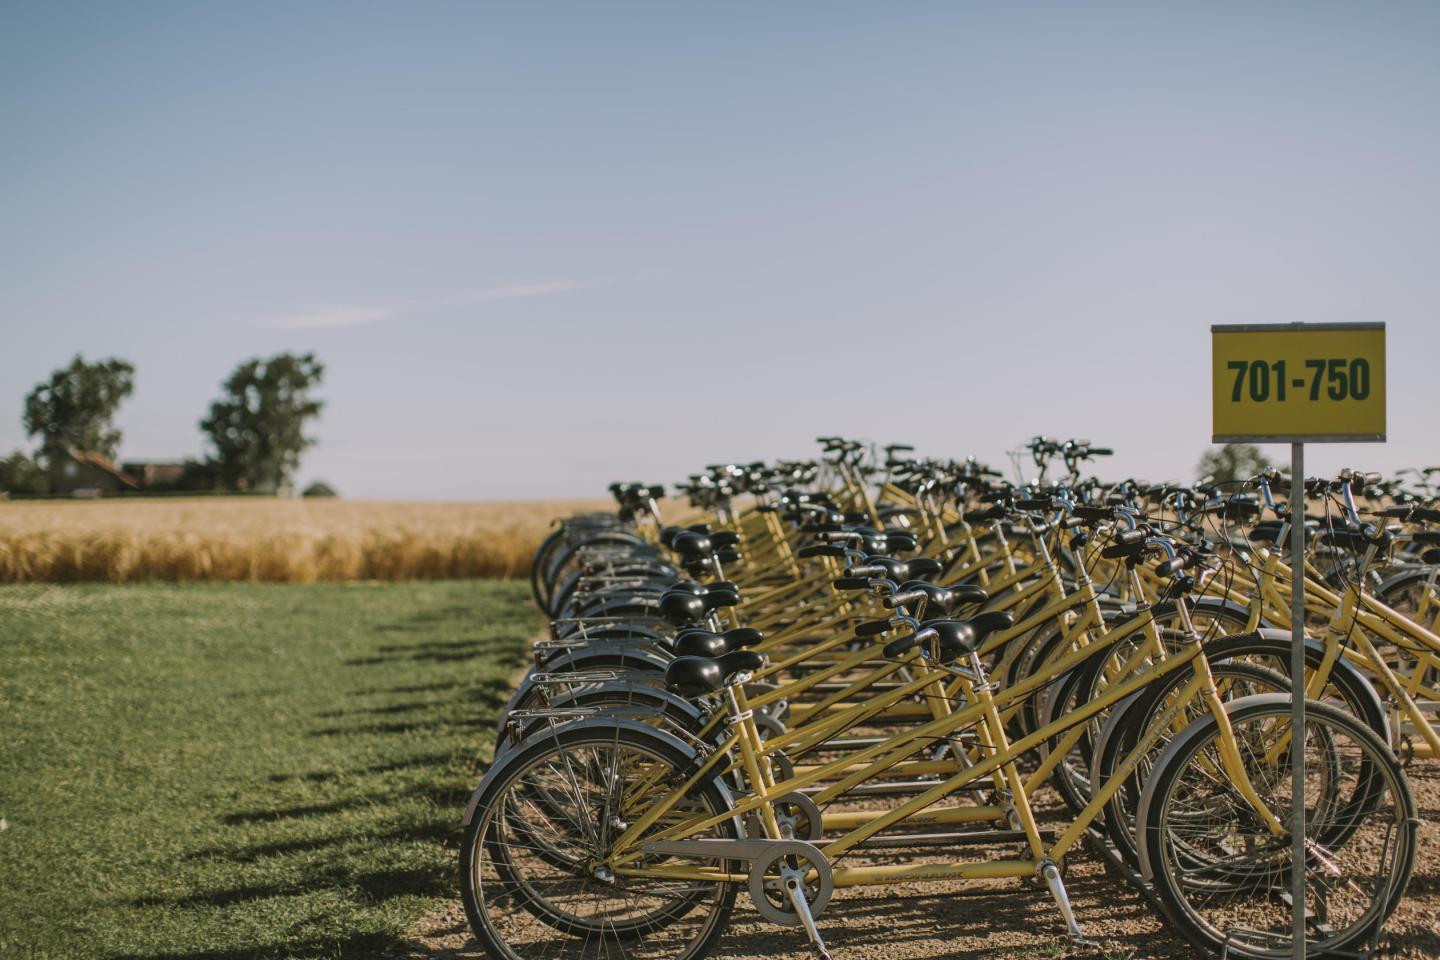 Rental bicycles lined up in docking station in the countryside